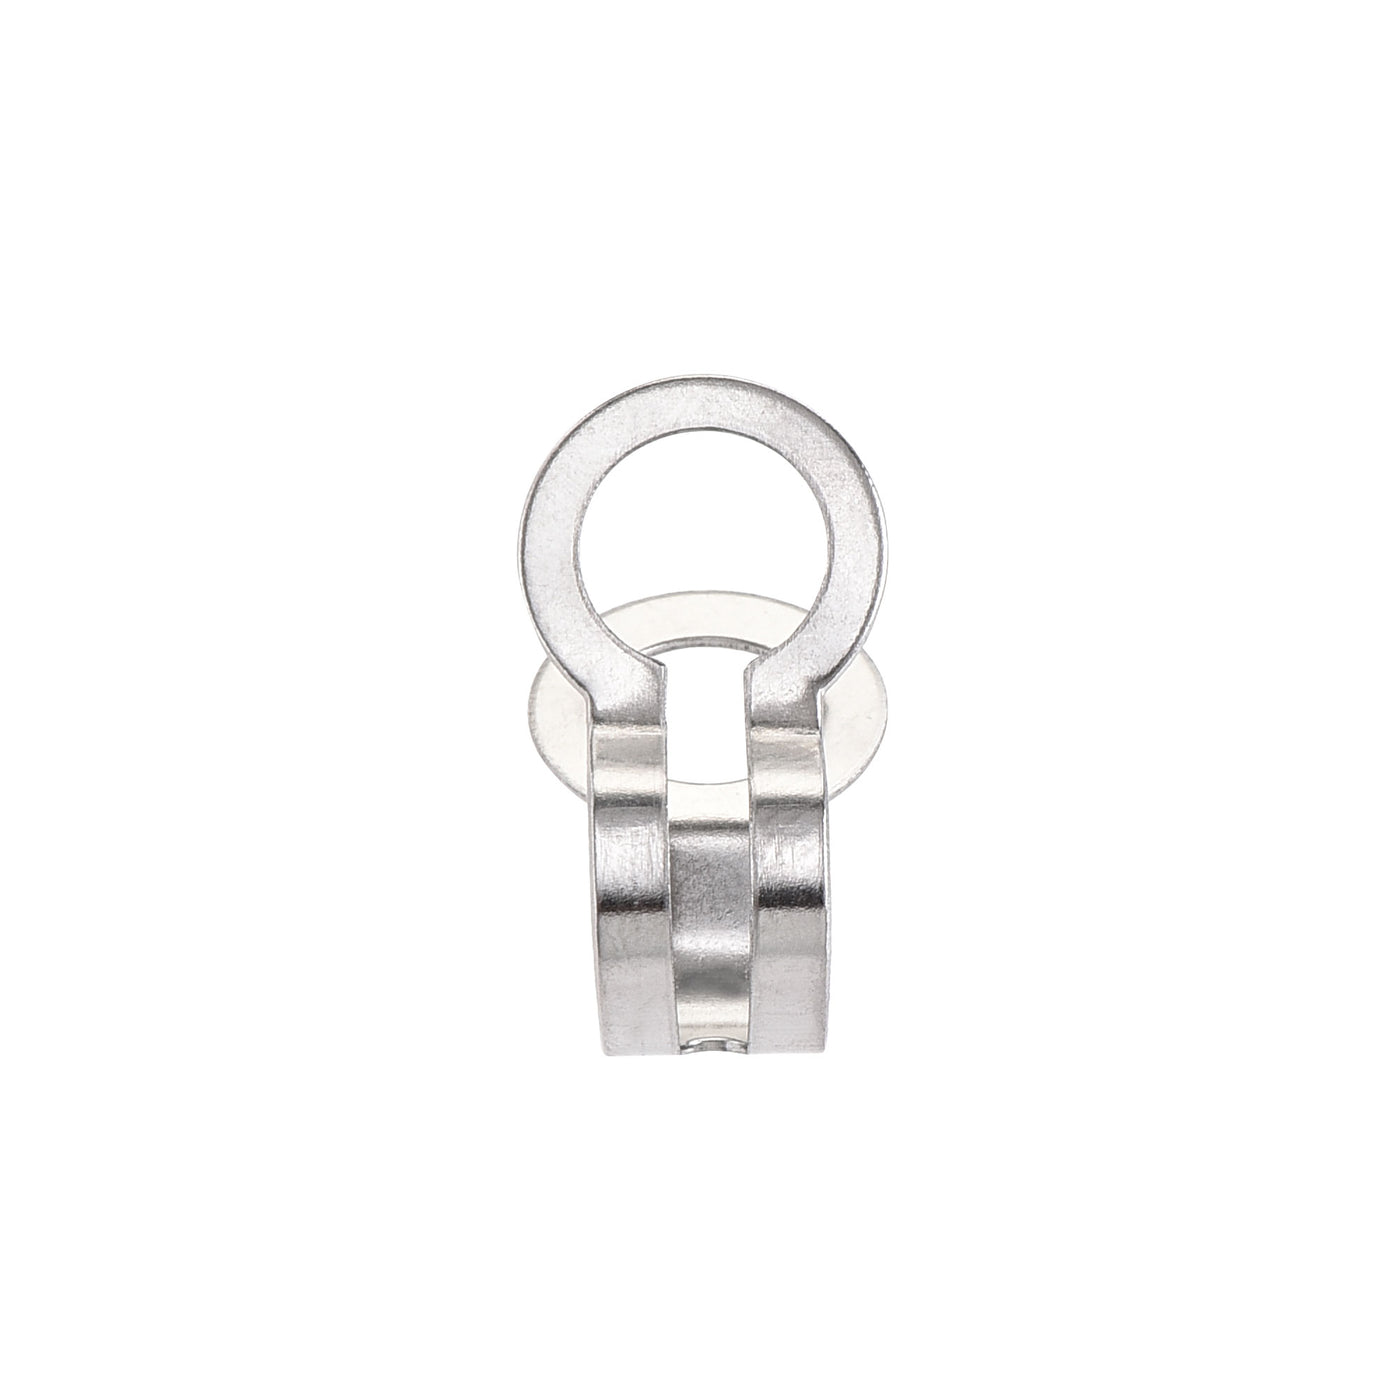 Uxcell Uxcell Ball Chain Connector, 5mm Double Ring Style Link Stainless Steel Loop Connection, Pack of 30